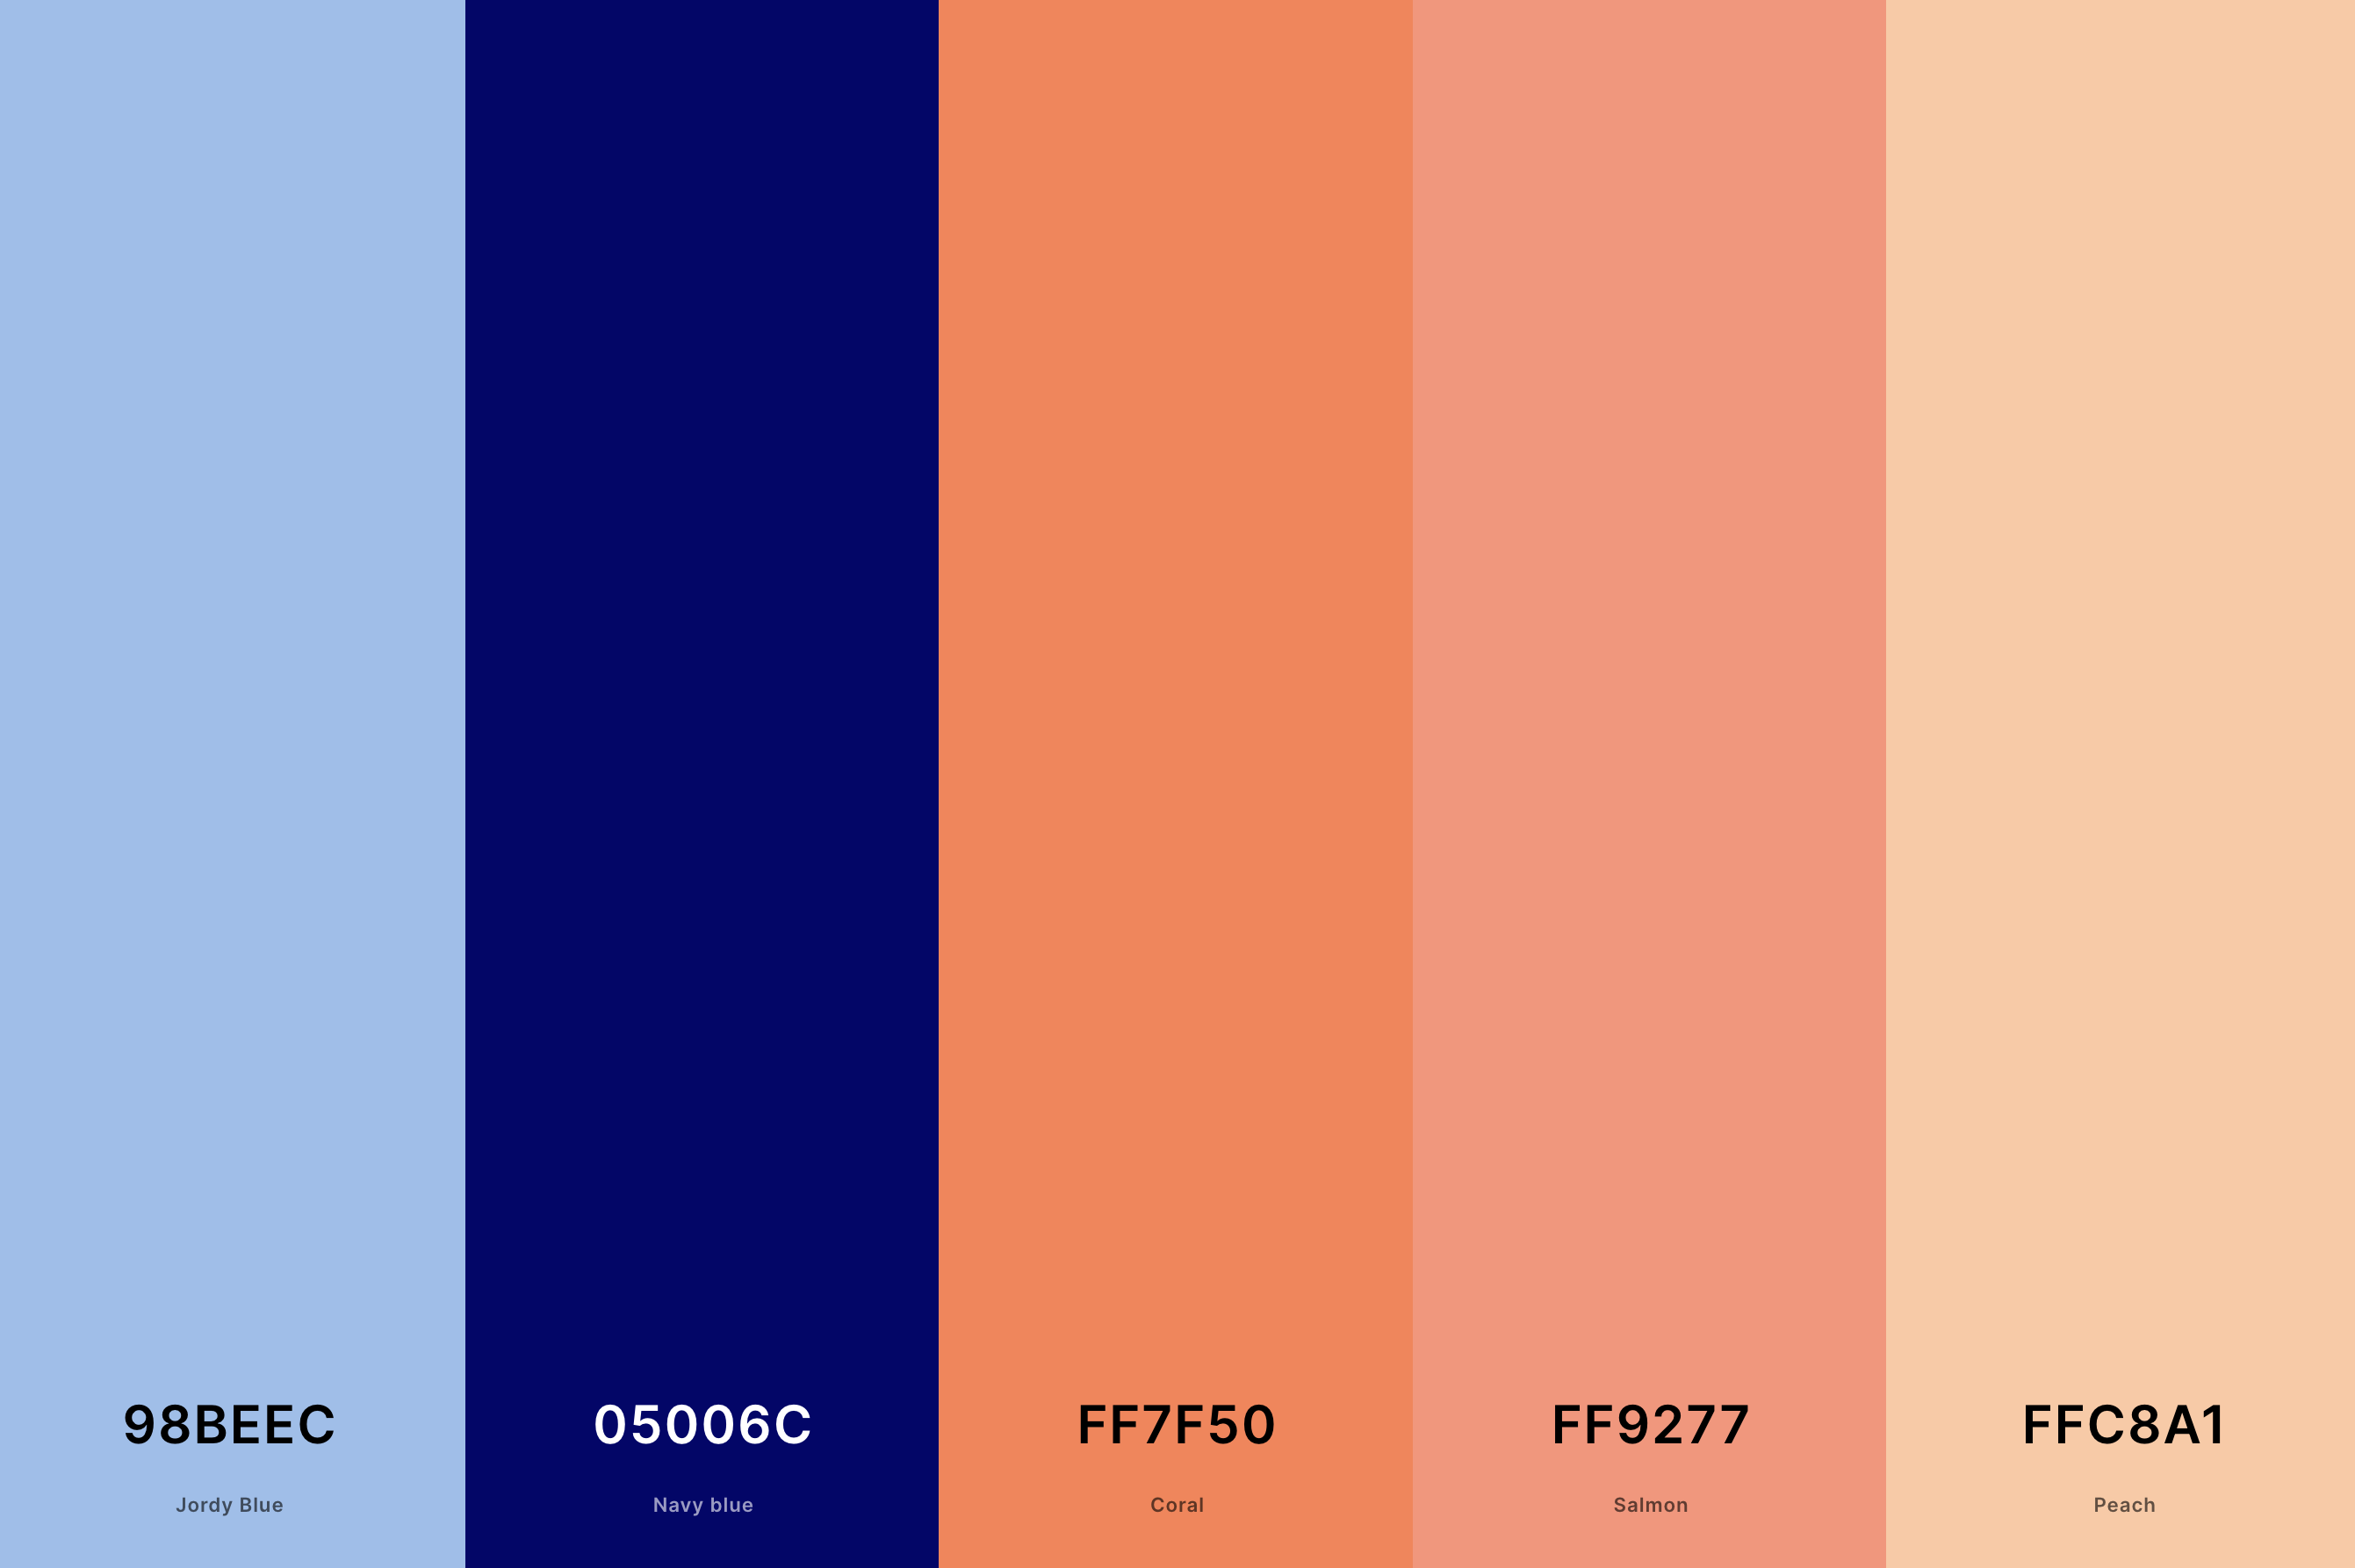 18. Navy Blue And Coral Color Palette Color Palette with Jordy Blue (Hex #98BEEC) + Navy Blue (Hex #05006C) + Coral (Hex #FF7F50) + Salmon (Hex #FF9277) + Peach (Hex #FFC8A1) Color Palette with Hex Codes